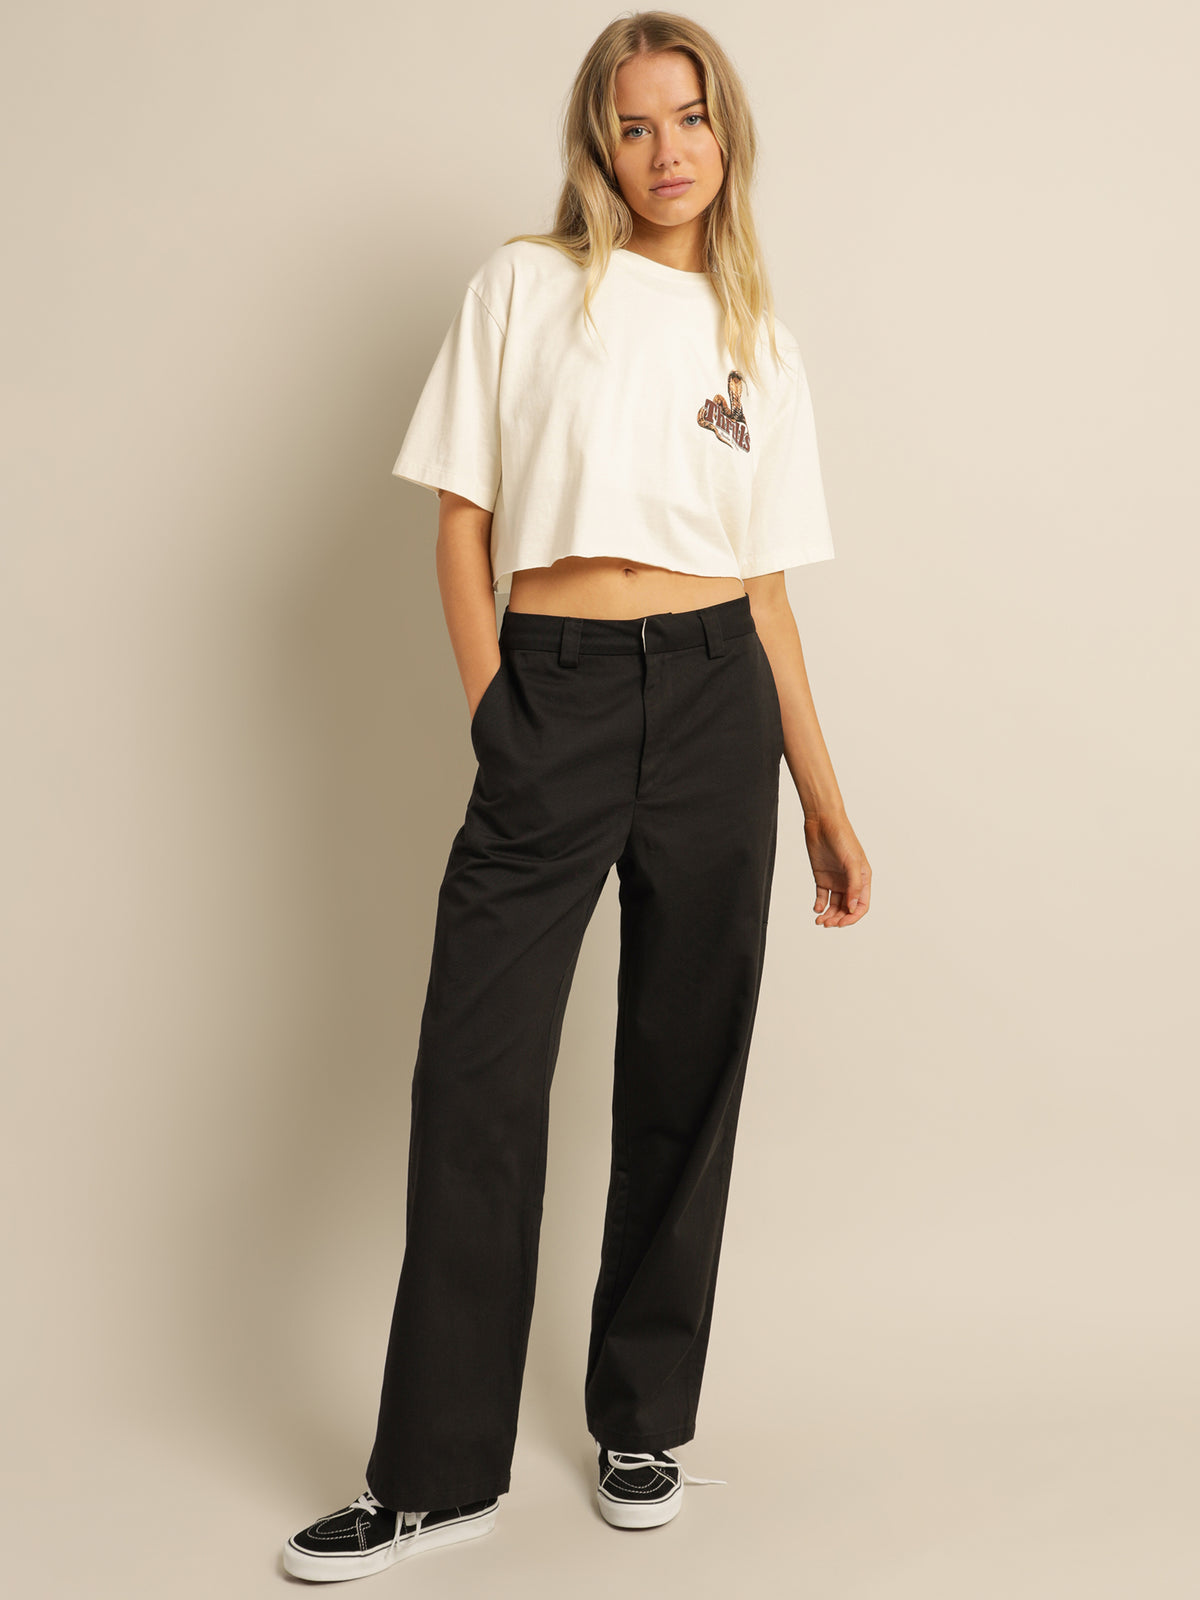 LAX Pant in Black